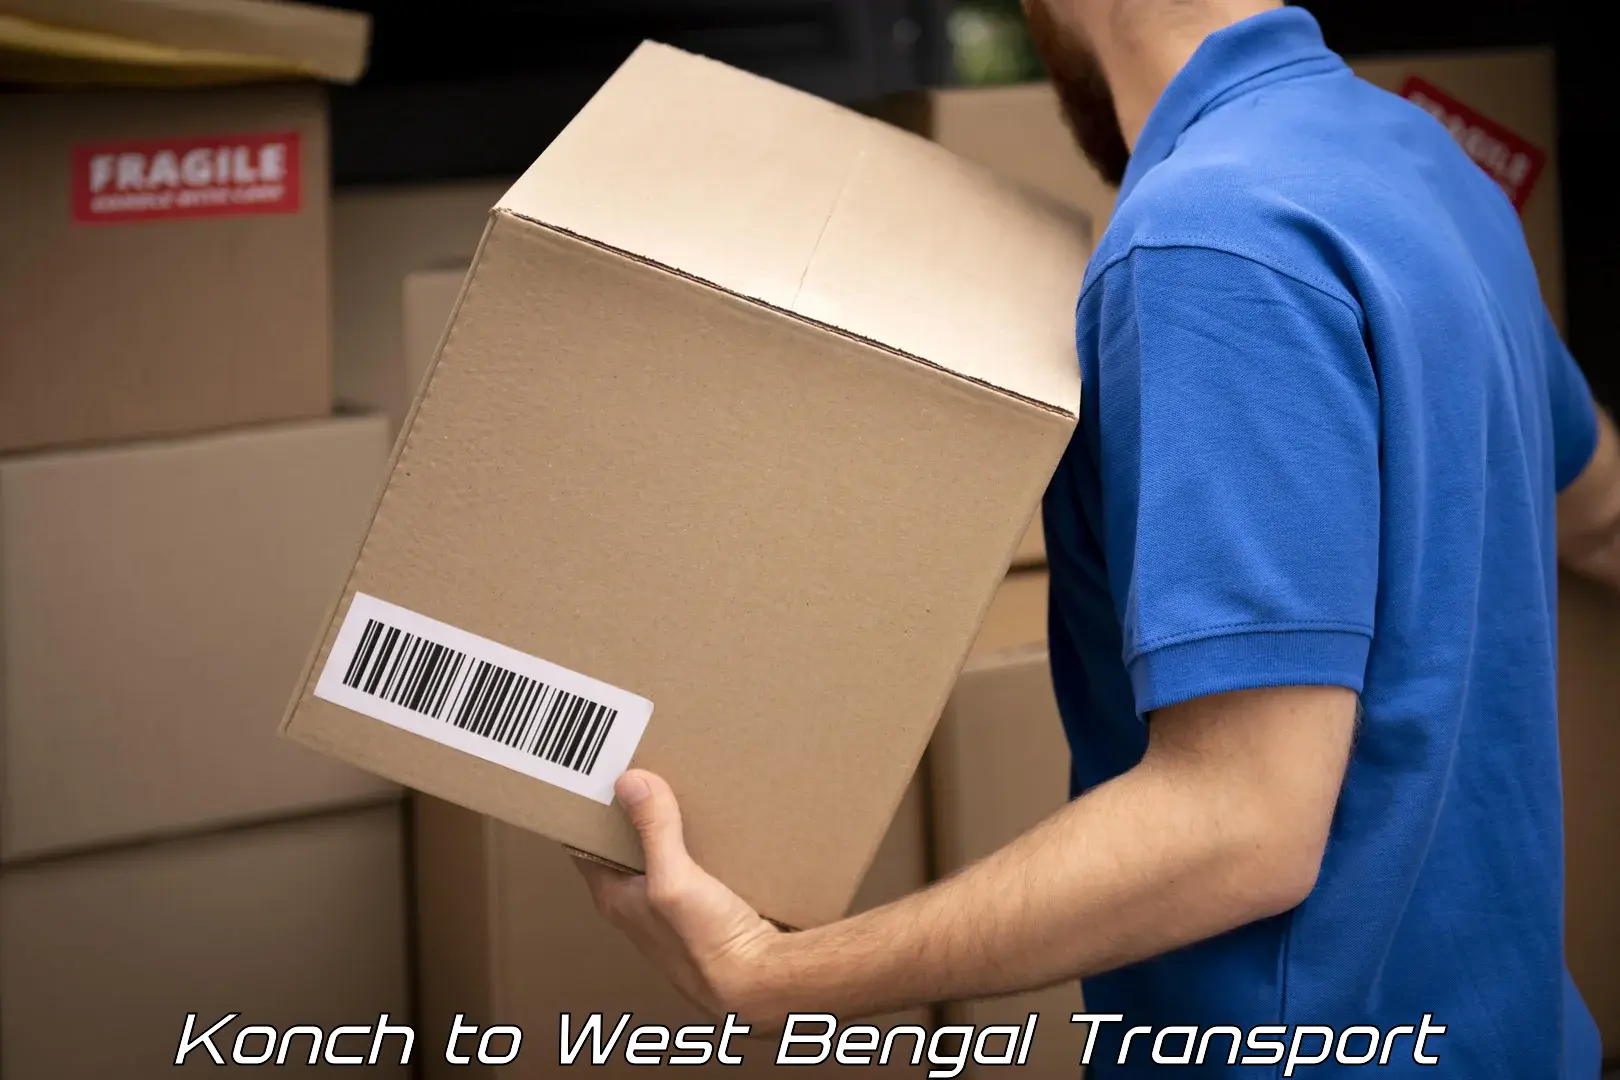 Online transport service Konch to West Bengal